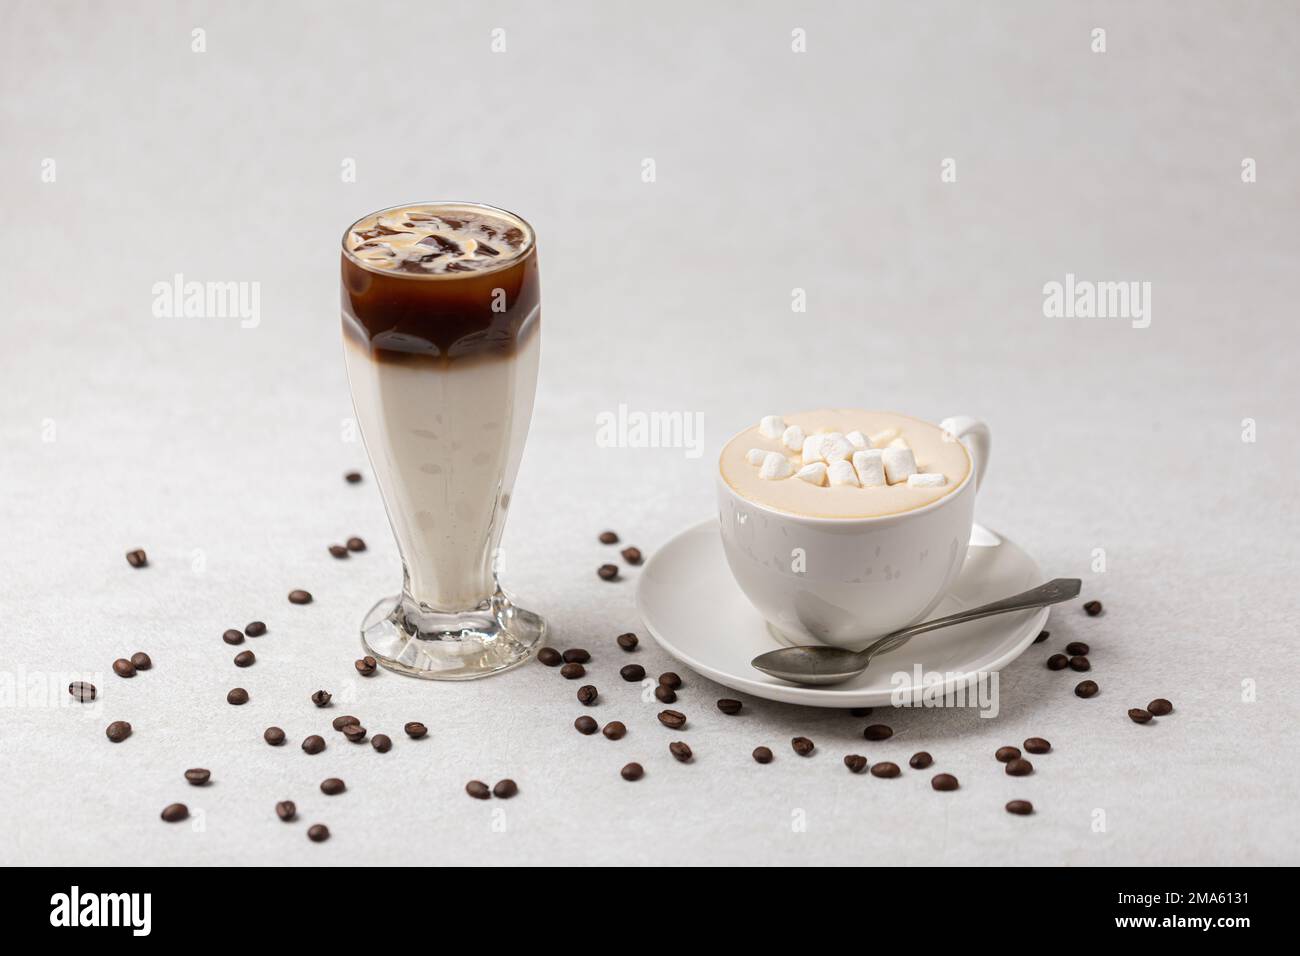 Two drinks cappuccino and iced coffee Stock Photo